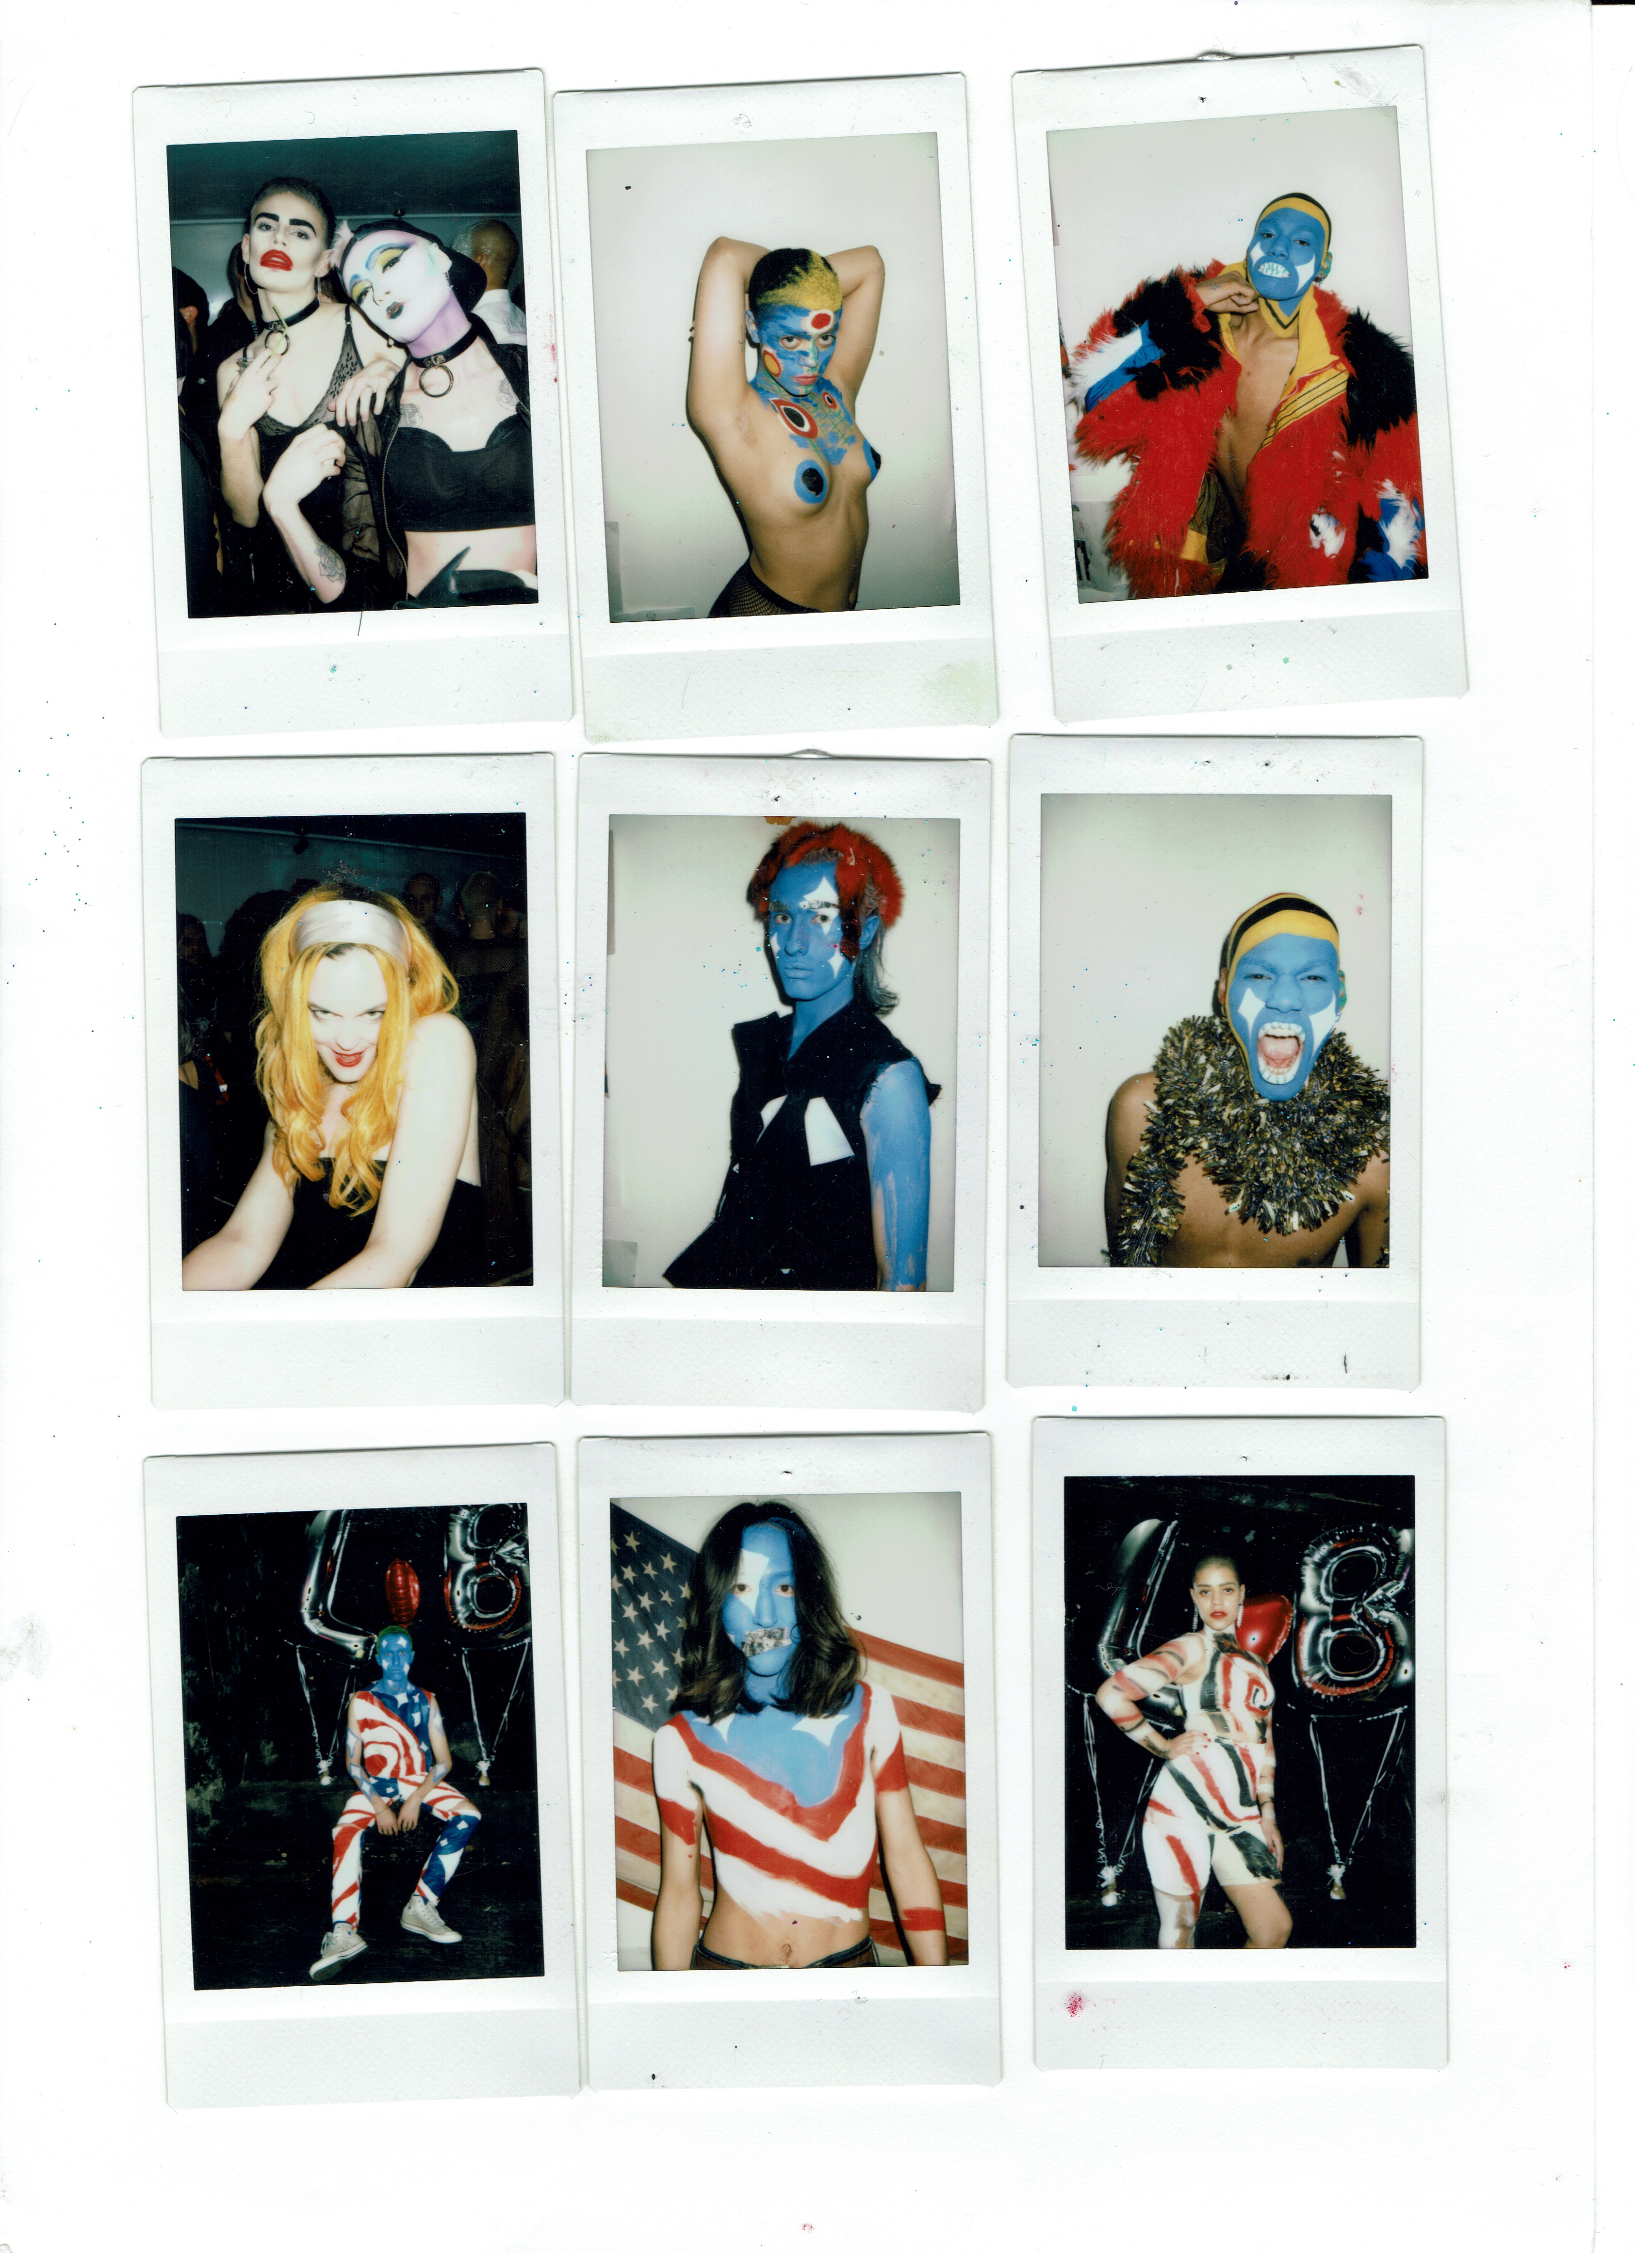 A series of 9 Polaroids by Tim Walker shows individual portraits from LOVERBY club nights